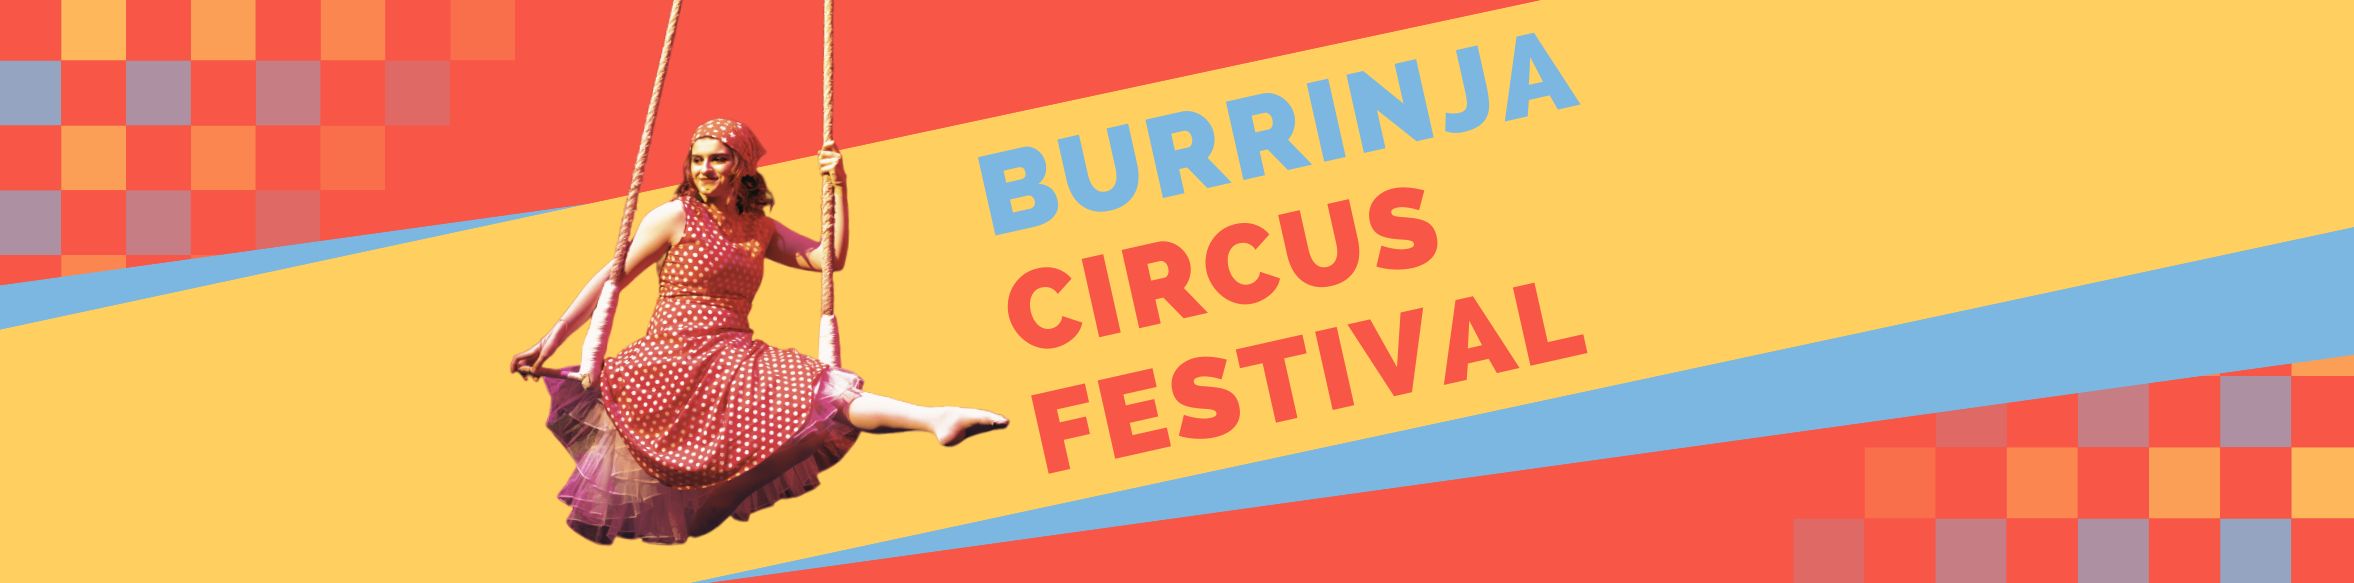 The Burrinja Circus Festival is back with a jam-packed week of circus fun for the whole family! 29 June - 5 July | Burrinja Theatre